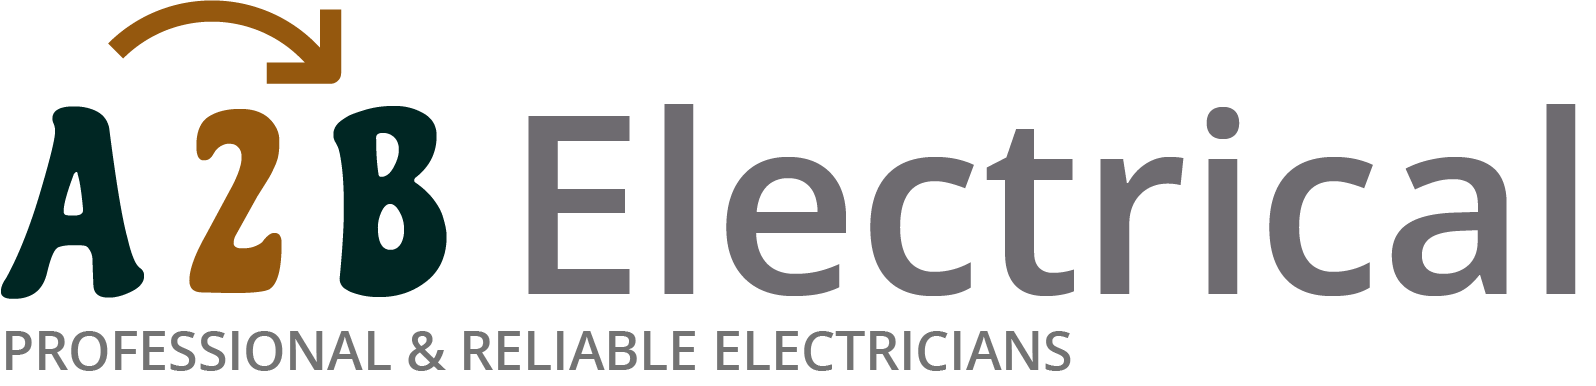 If you have electrical wiring problems in Wisbech, we can provide an electrician to have a look for you. 